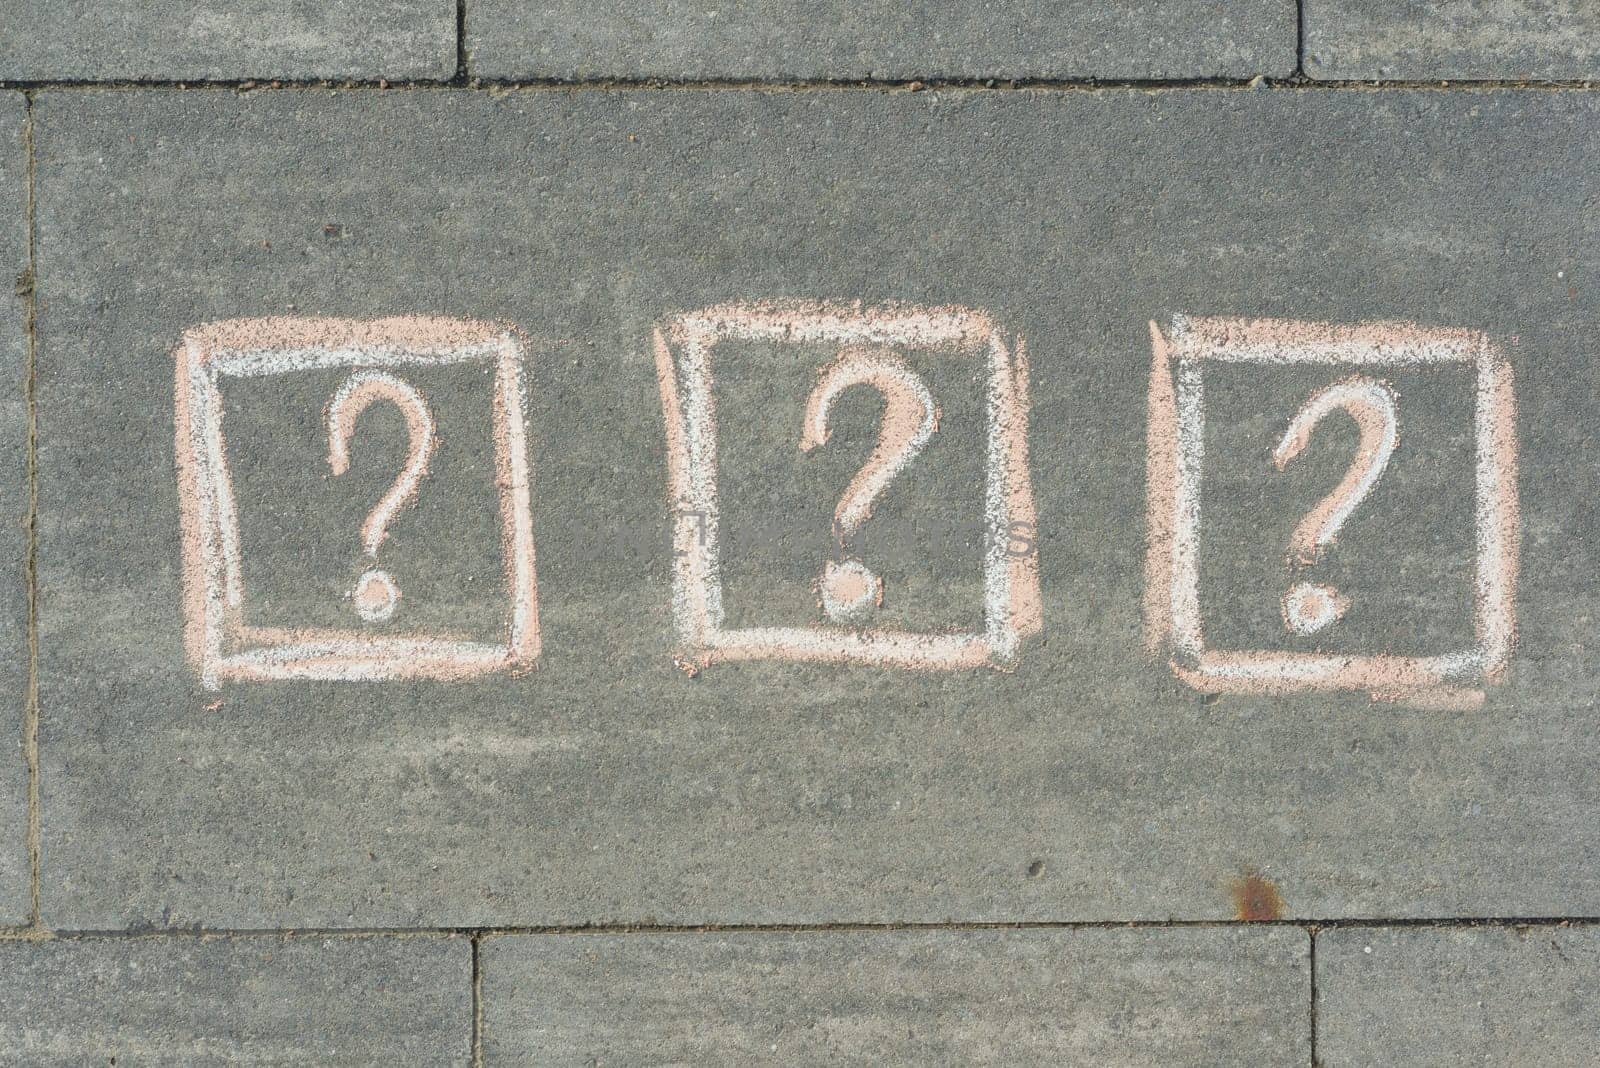 3 question marks painted on the grey sidewalk.